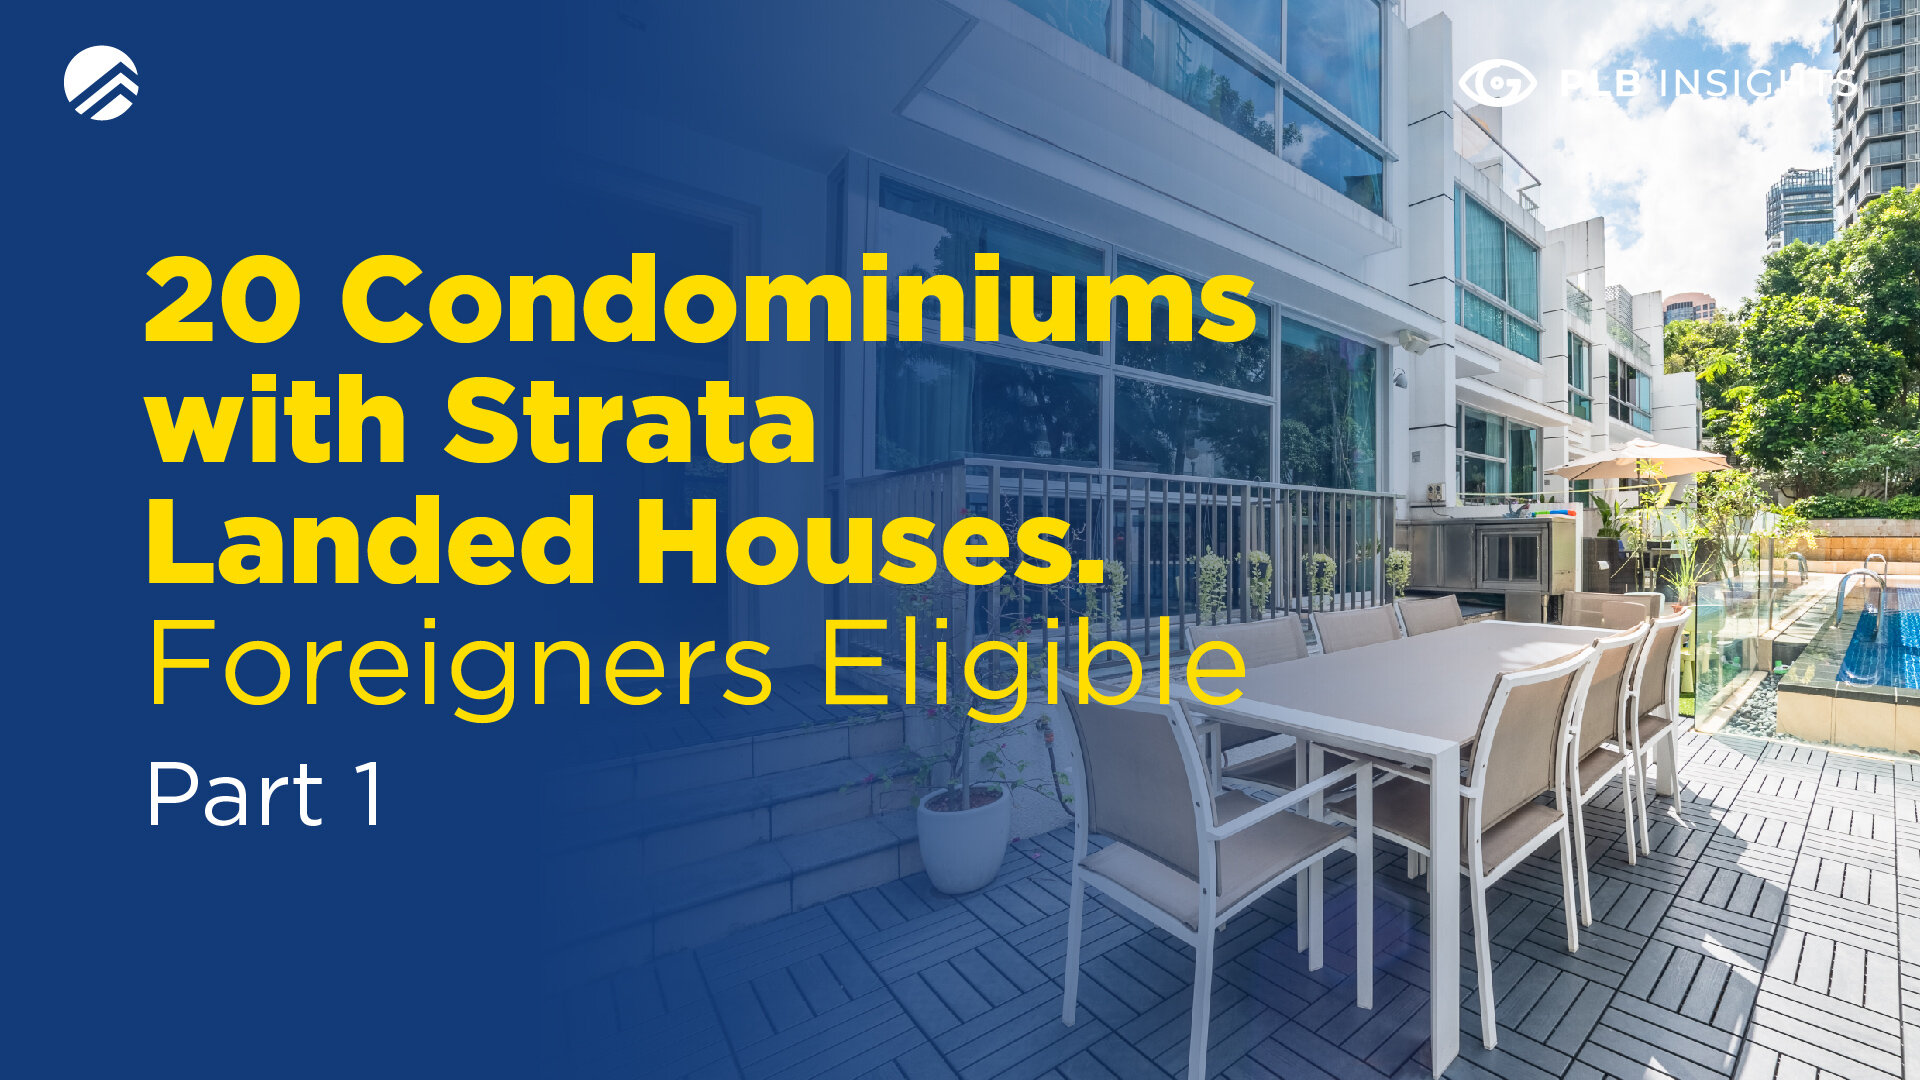 20 Condominiums with Strata Landed Houses. Foreigners Eligible (Part 1)_Article Cover.jpg